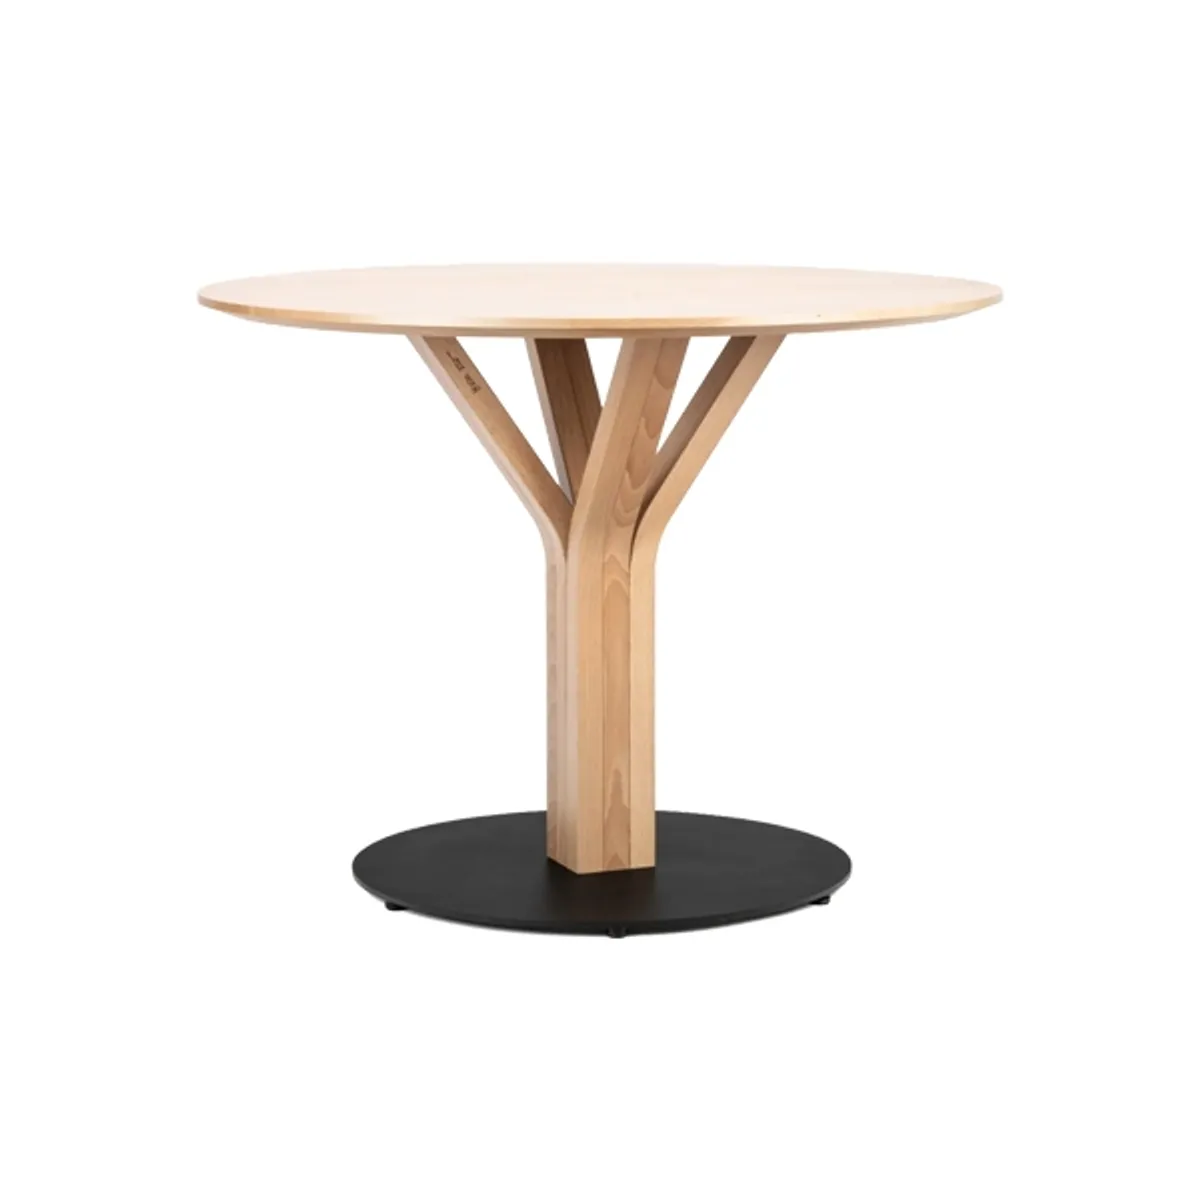 Albero round table Inside Out Contracts